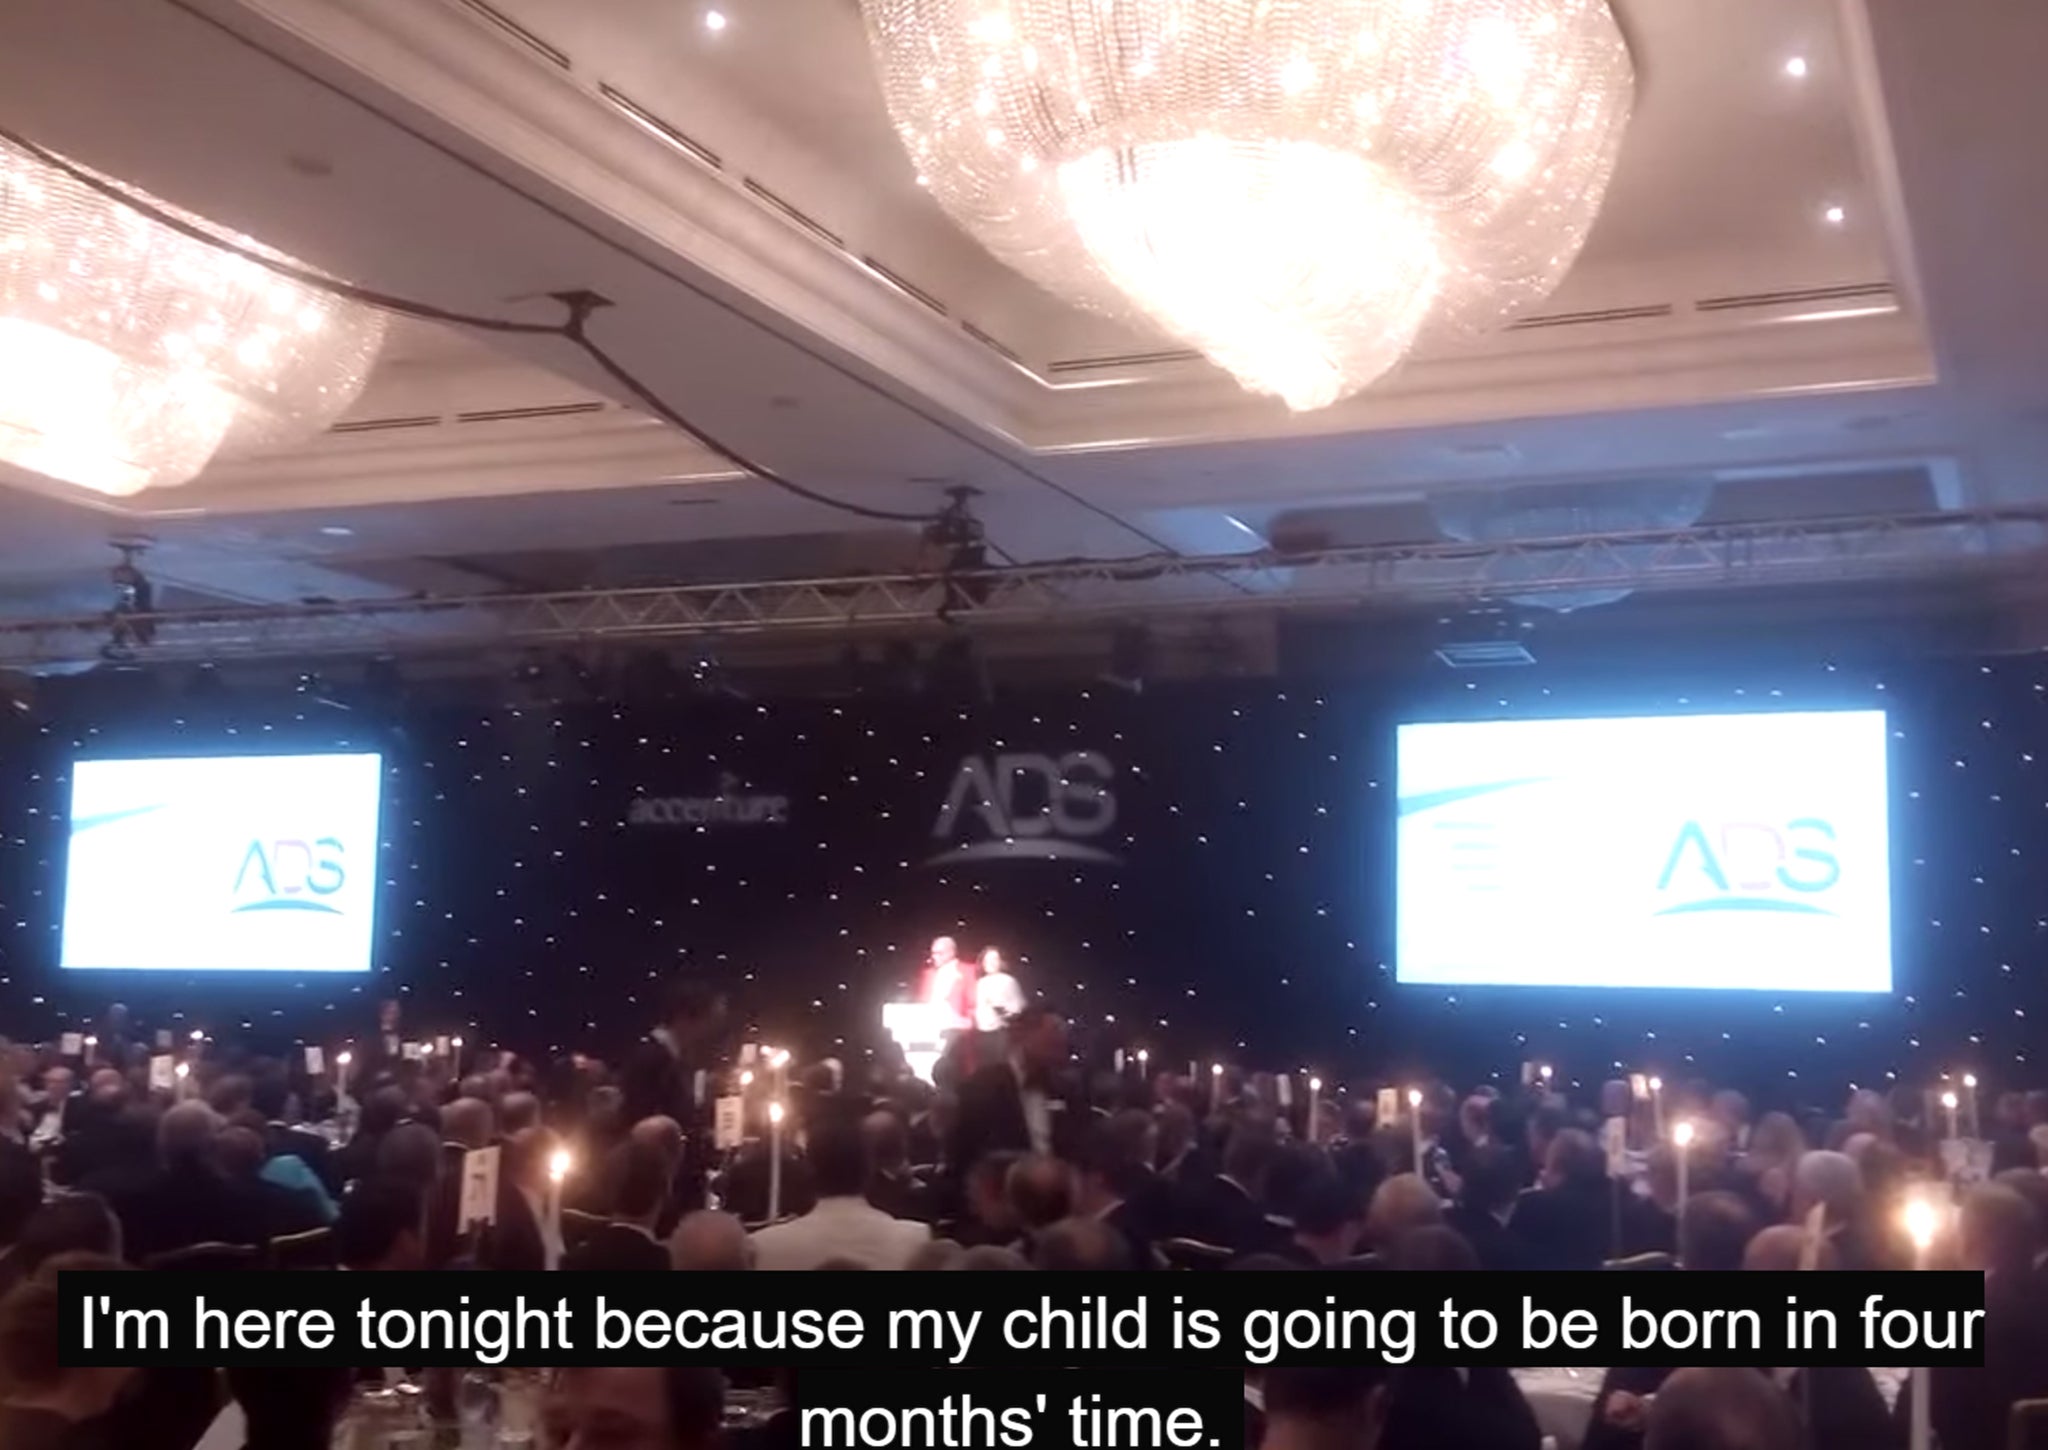 Anne-Marie speaks at the ADS dinner on February 4, 2015